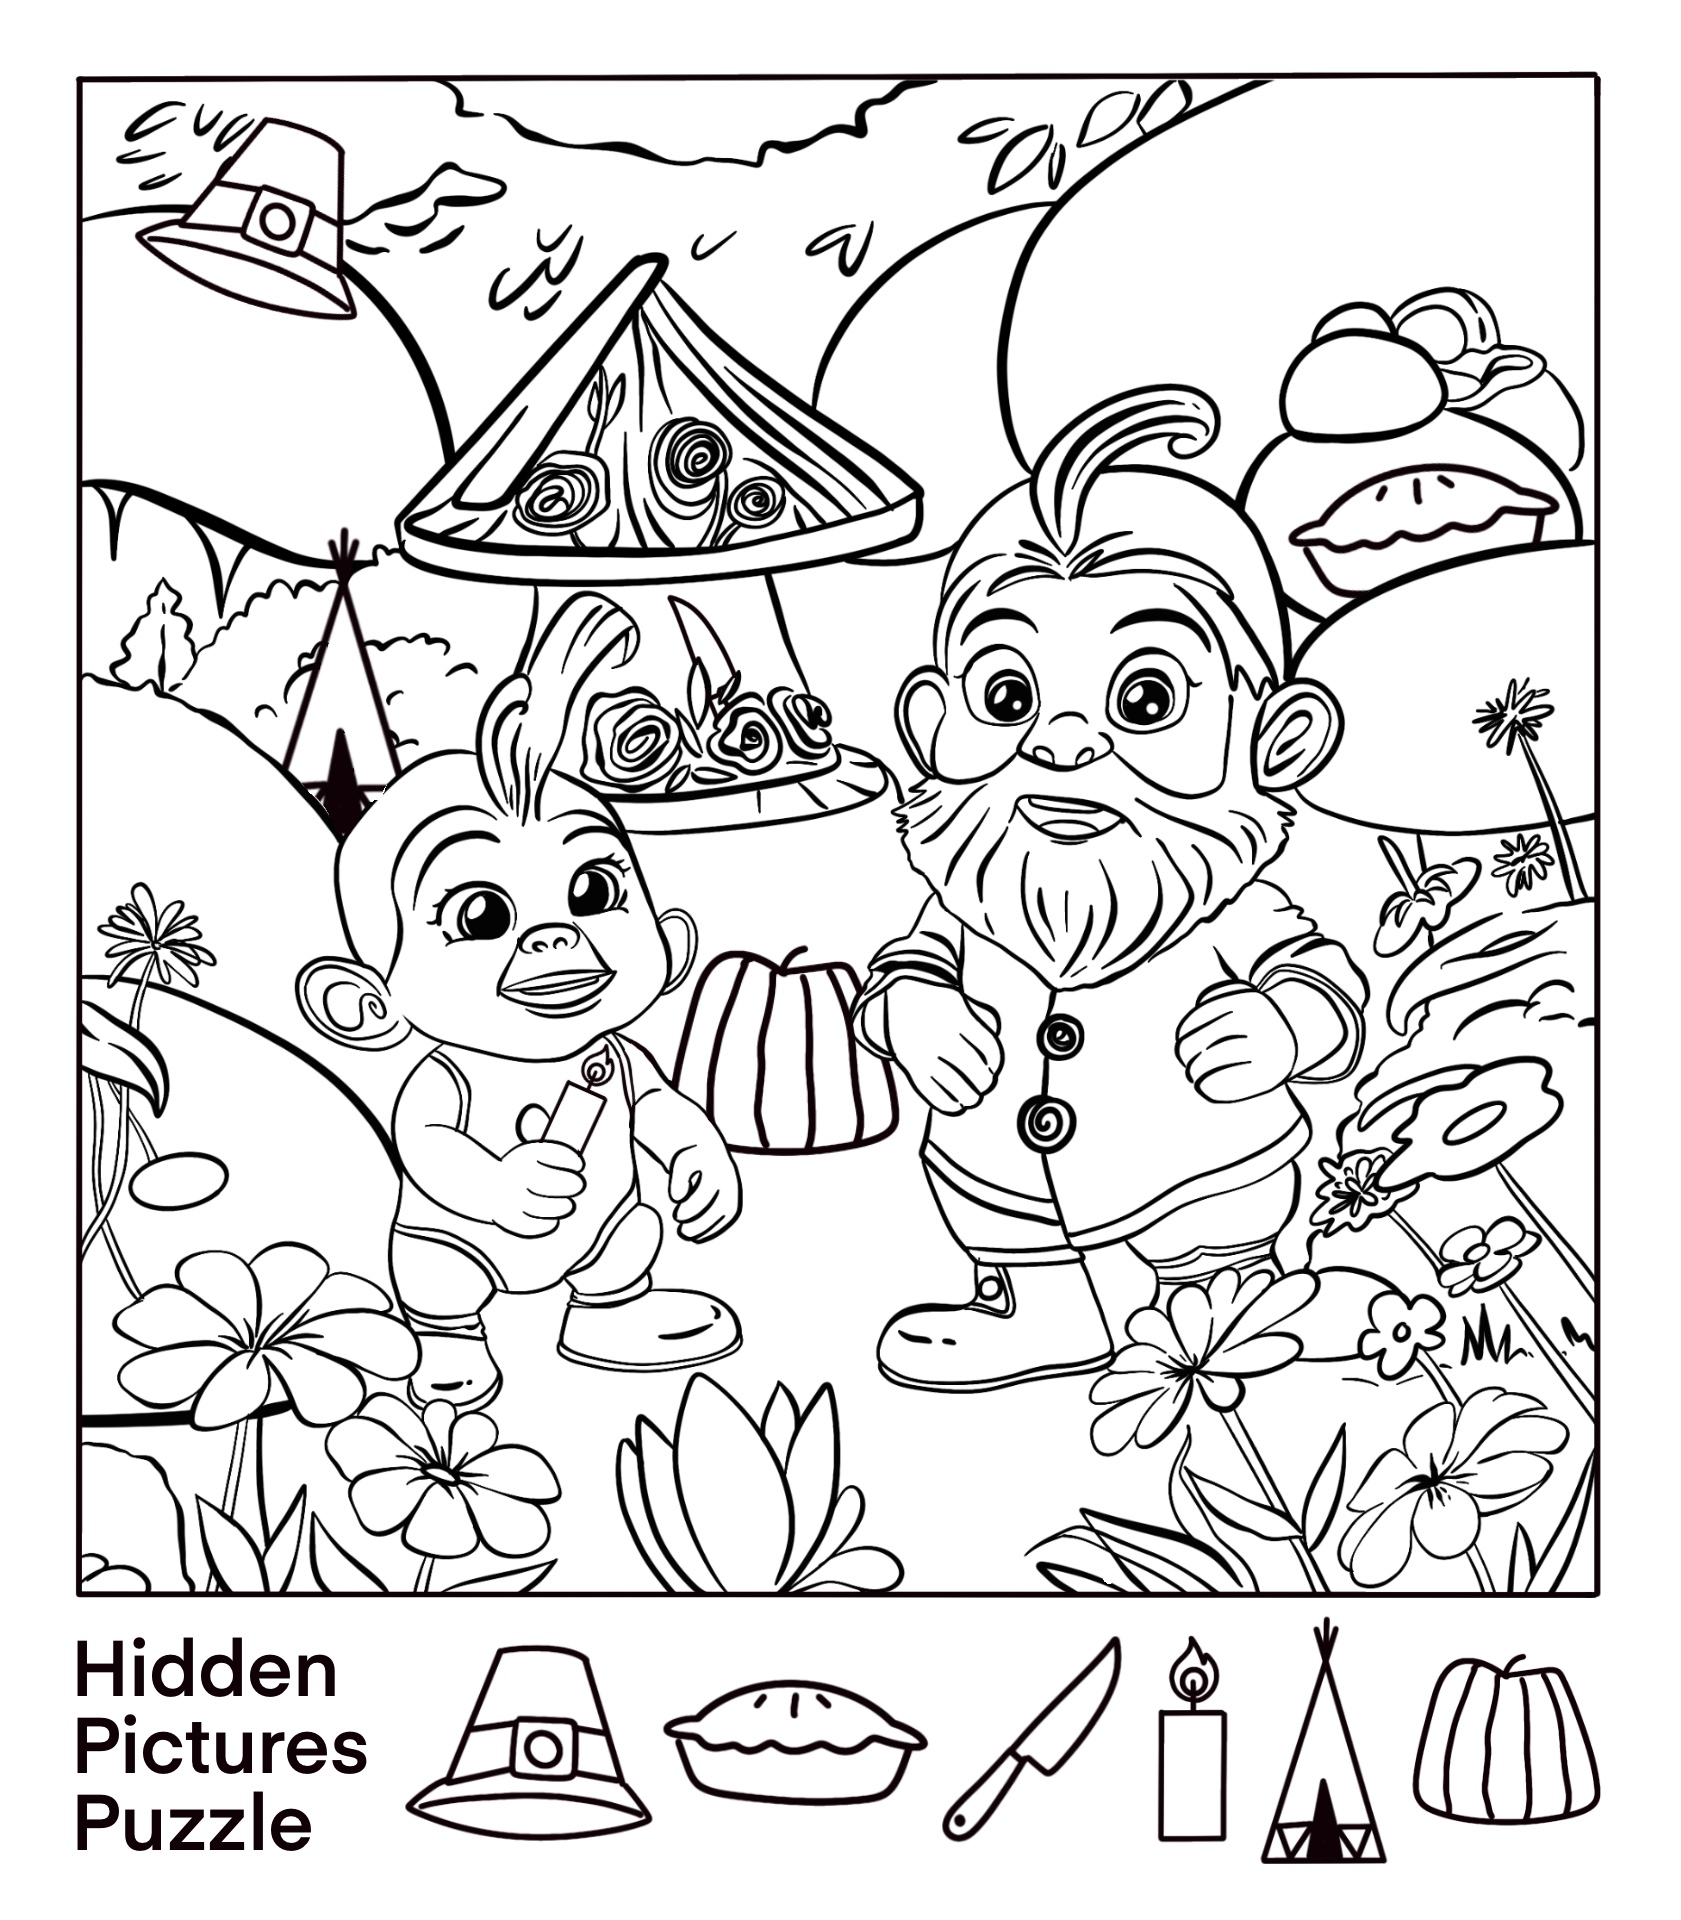 printable-hidden-picture-puzzles-printable-world-holiday